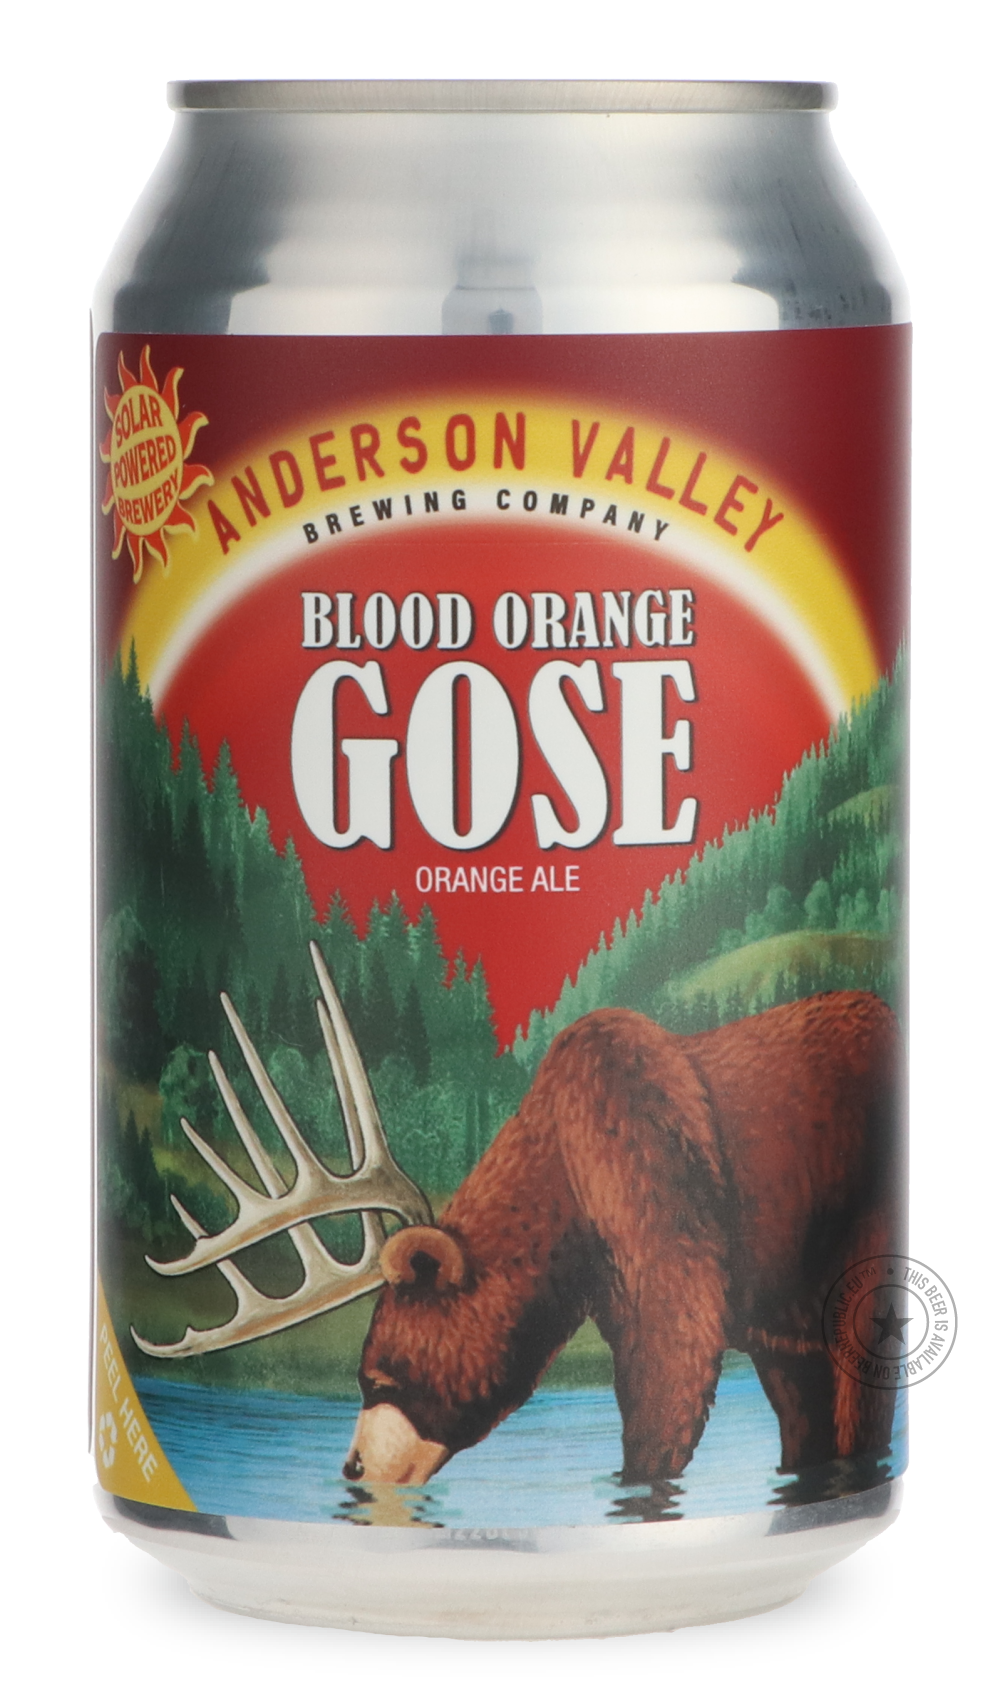 -Anderson Valley- Blood Orange Gose-Sour / Wild & Fruity- Only @ Beer Republic - The best online beer store for American & Canadian craft beer - Buy beer online from the USA and Canada - Bier online kopen - Amerikaans bier kopen - Craft beer store - Craft beer kopen - Amerikanisch bier kaufen - Bier online kaufen - Acheter biere online - IPA - Stout - Porter - New England IPA - Hazy IPA - Imperial Stout - Barrel Aged - Barrel Aged Imperial Stout - Brown - Dark beer - Blond - Blonde - Pilsner - Lager - Wheat